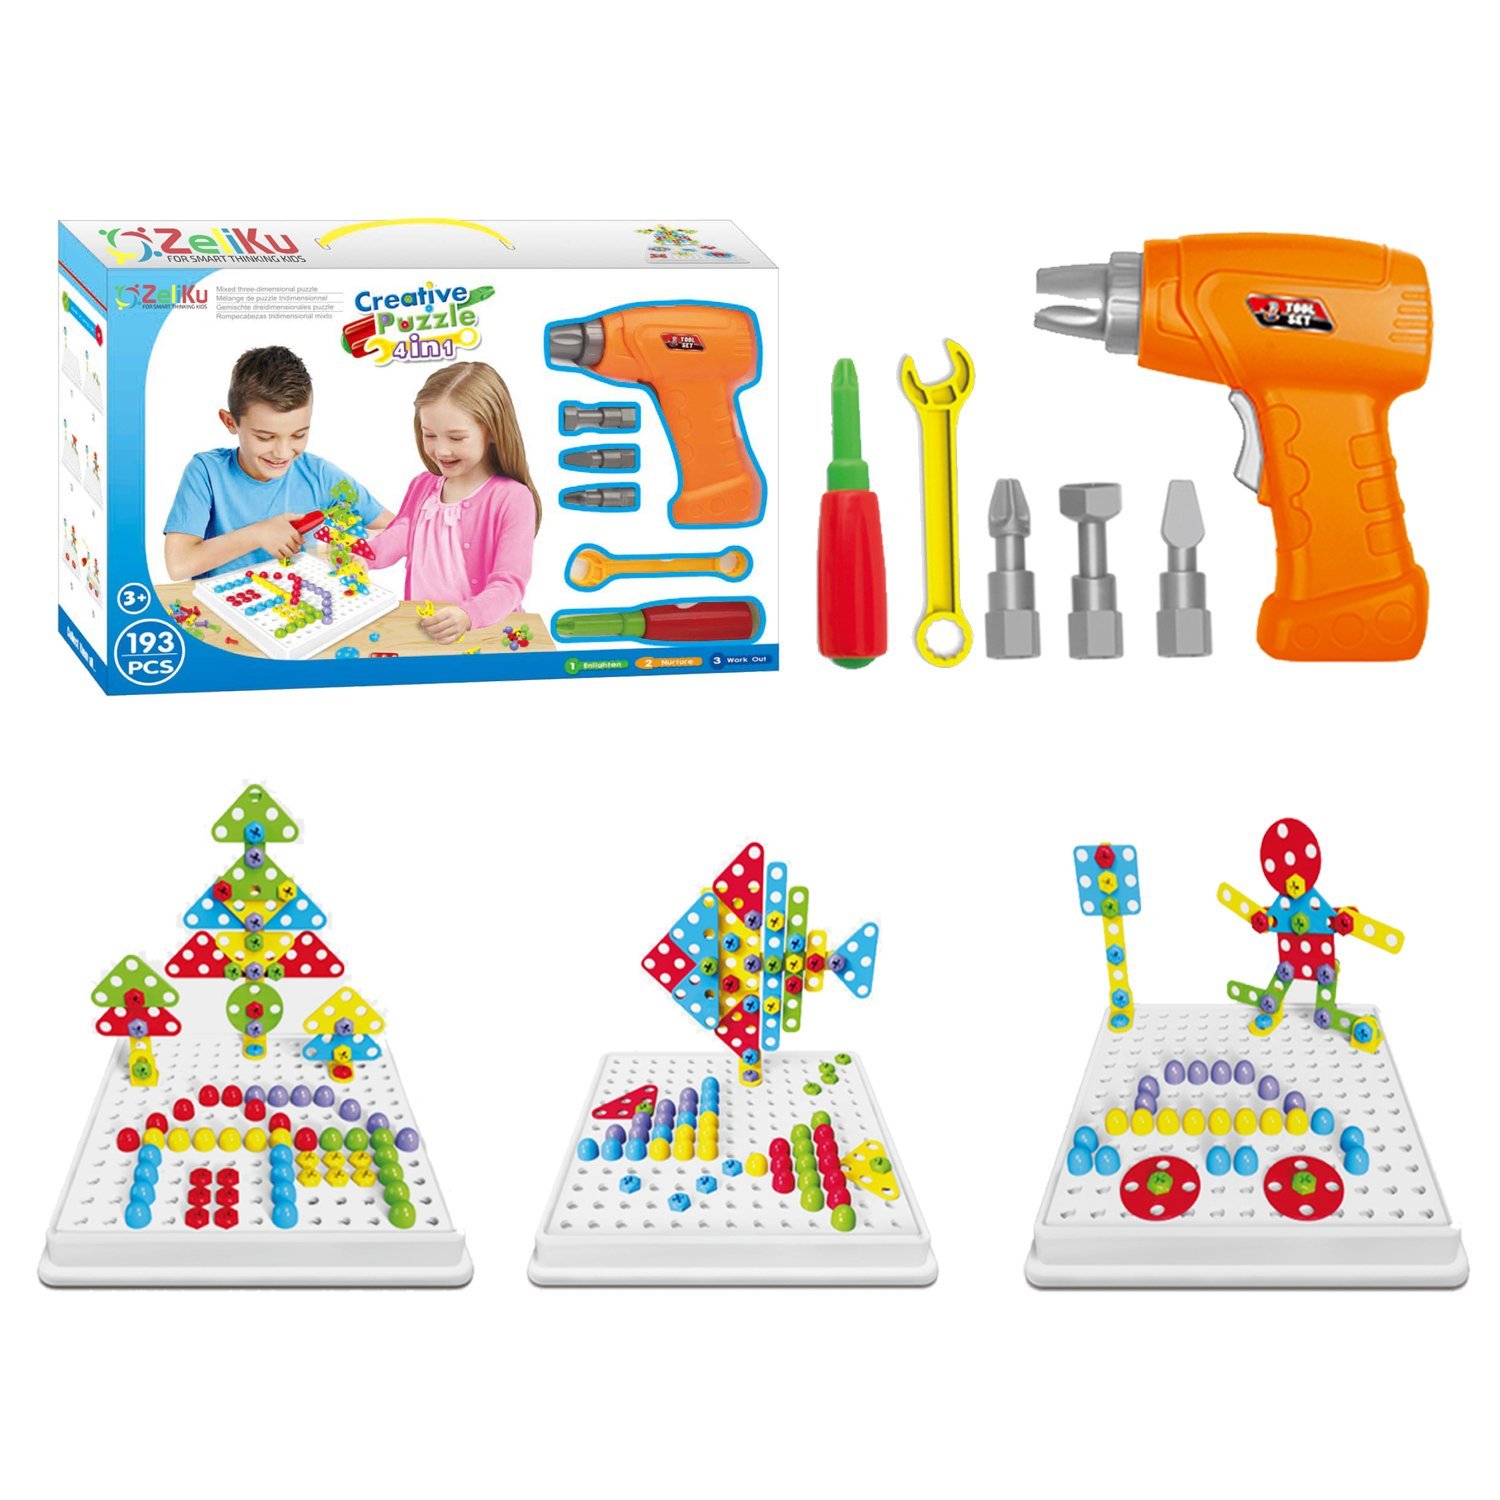 Educational Design and Drill toy Building toys set - 193 Pcs with board game STEM Learning Construction creative playset for 3, 4, 5+ Year Old Boys & Girls Best Toy Gift for Kids Ages 3yr – 6yr & up - image 1 of 7